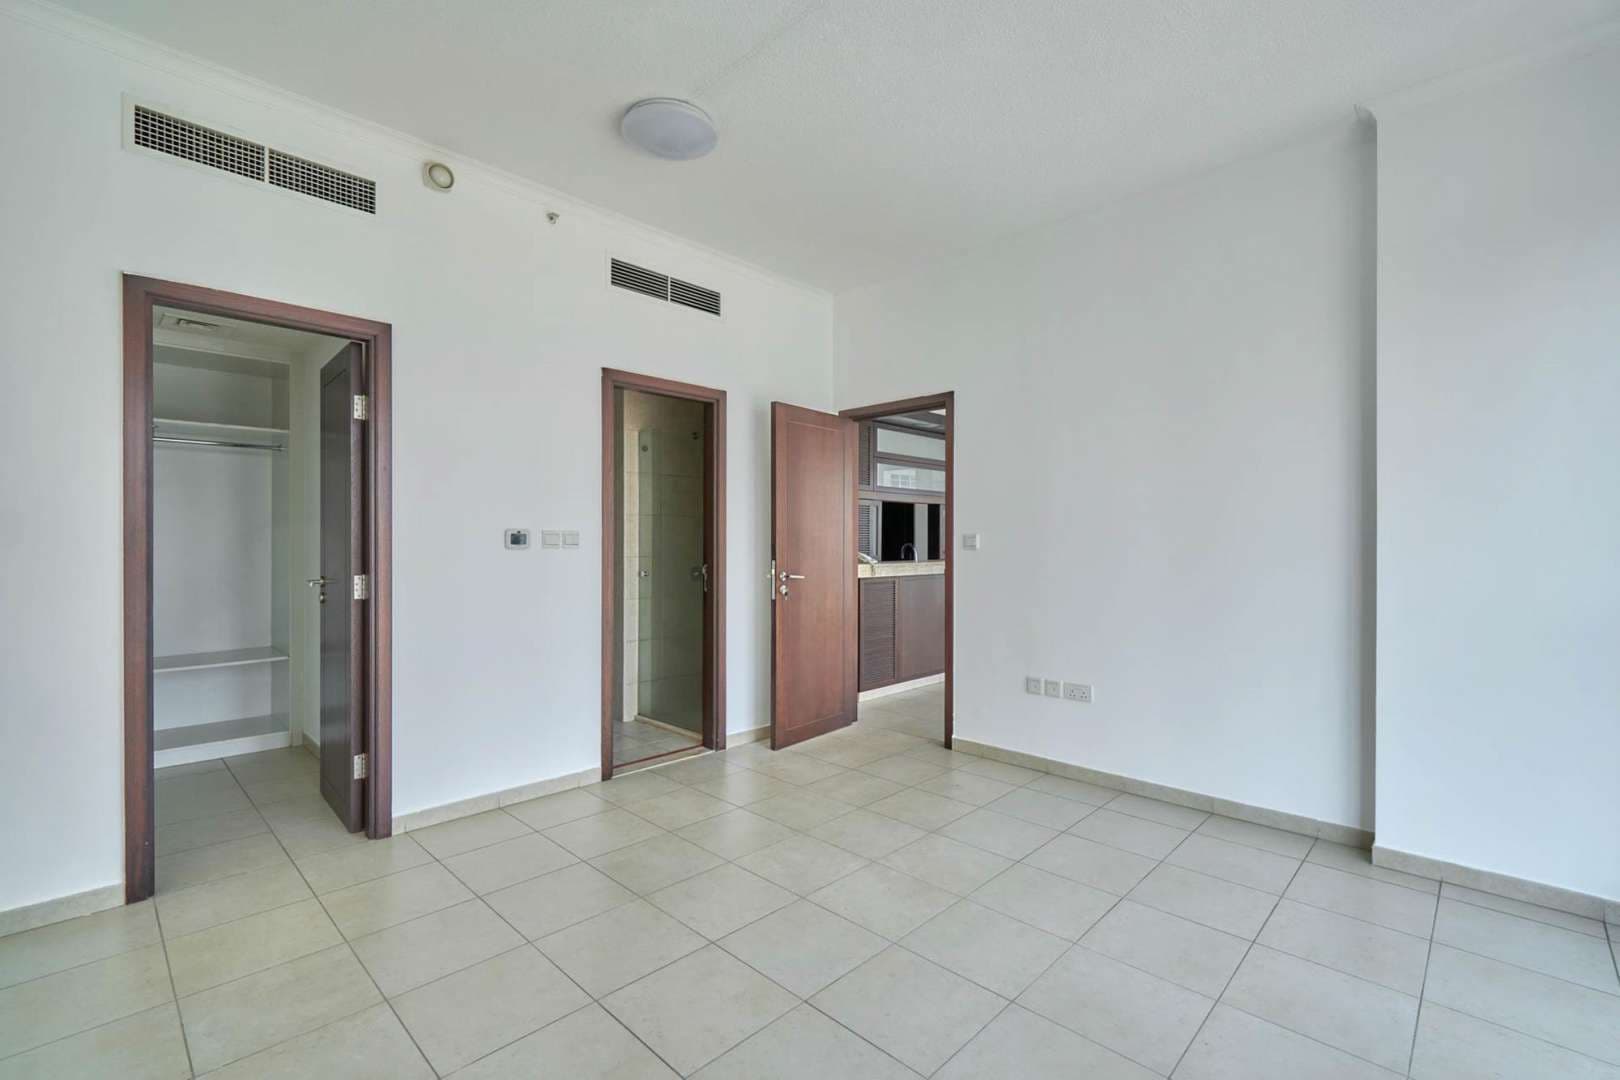 3 Bedroom Apartment For Rent The Residences Downtown Dubai Lp05899 2f61703aa6b17000.jpg